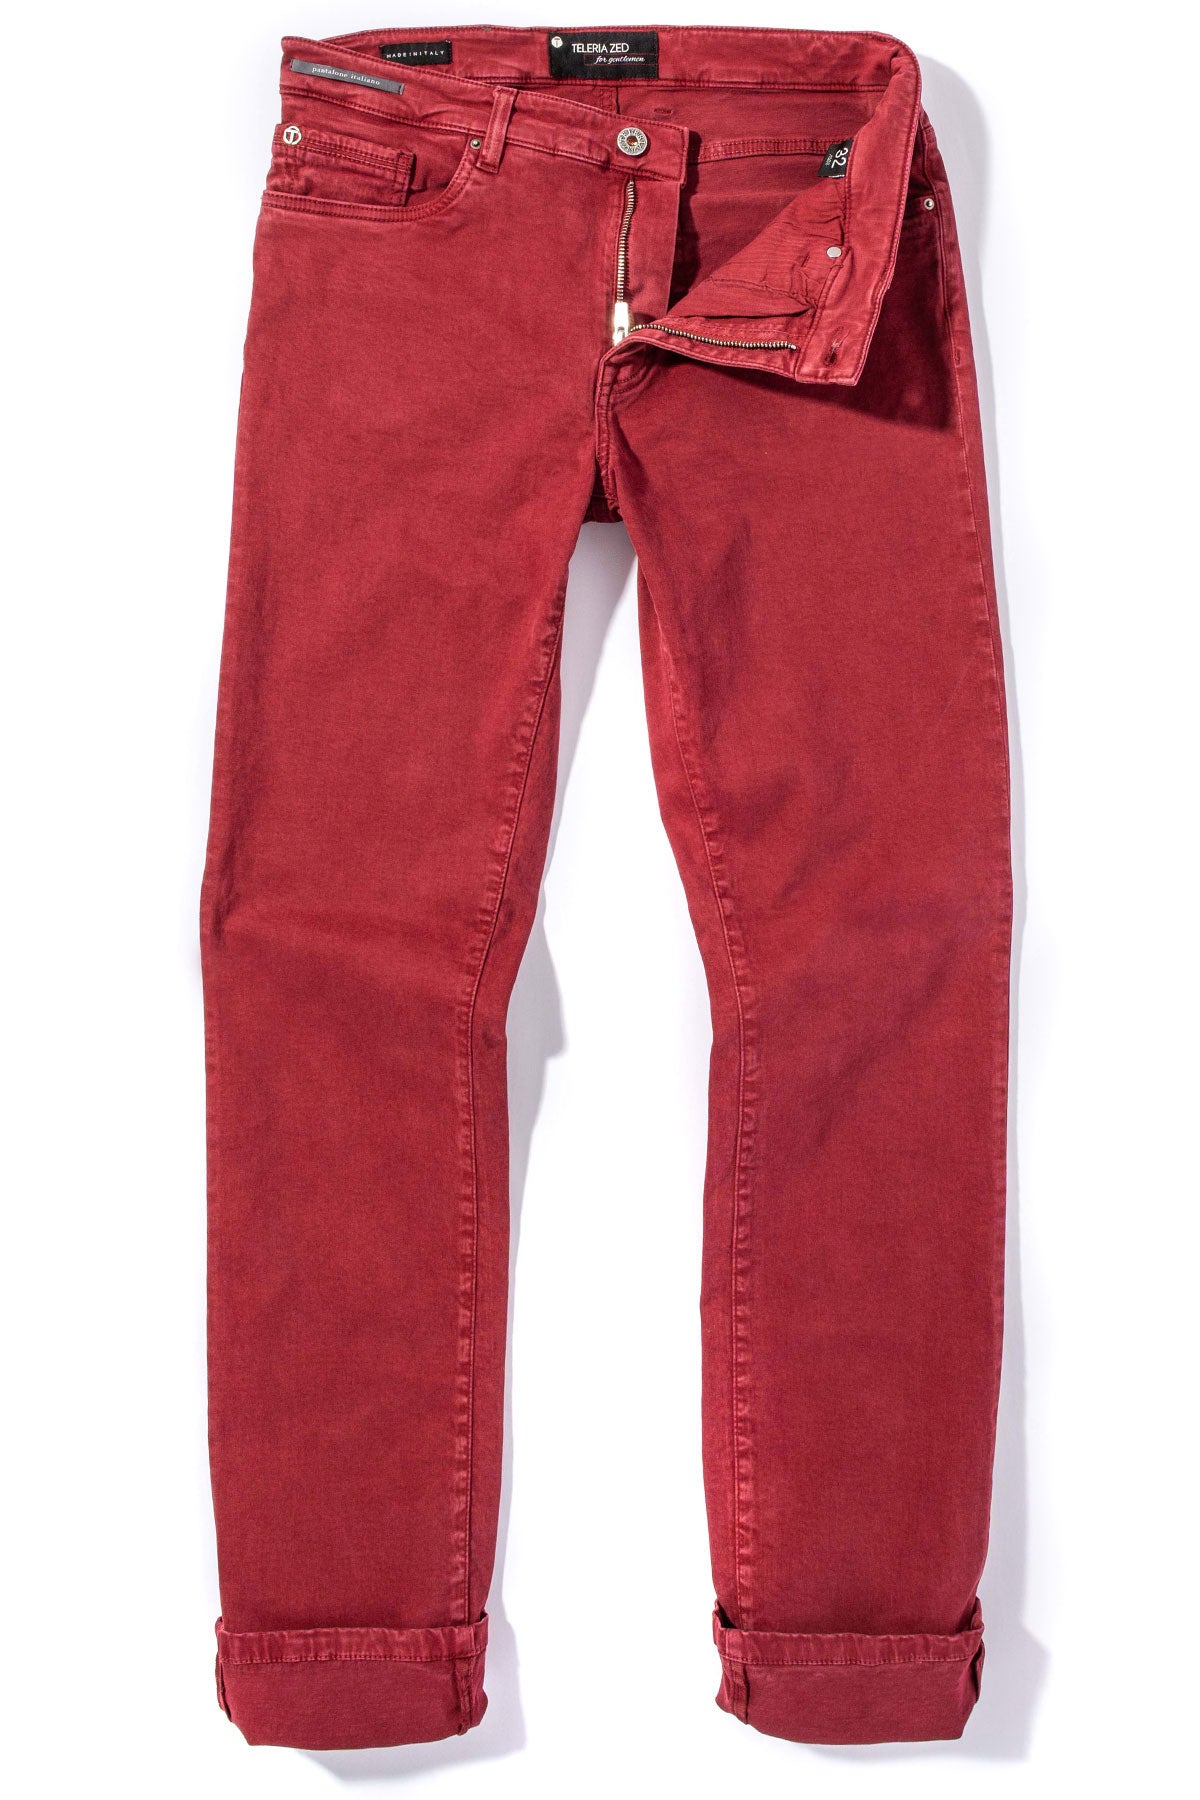 Ryland Rugged Soft Touch Cotton Jeans in Cherry | Mens - Pants - 5 Pocket | Teleria Zed